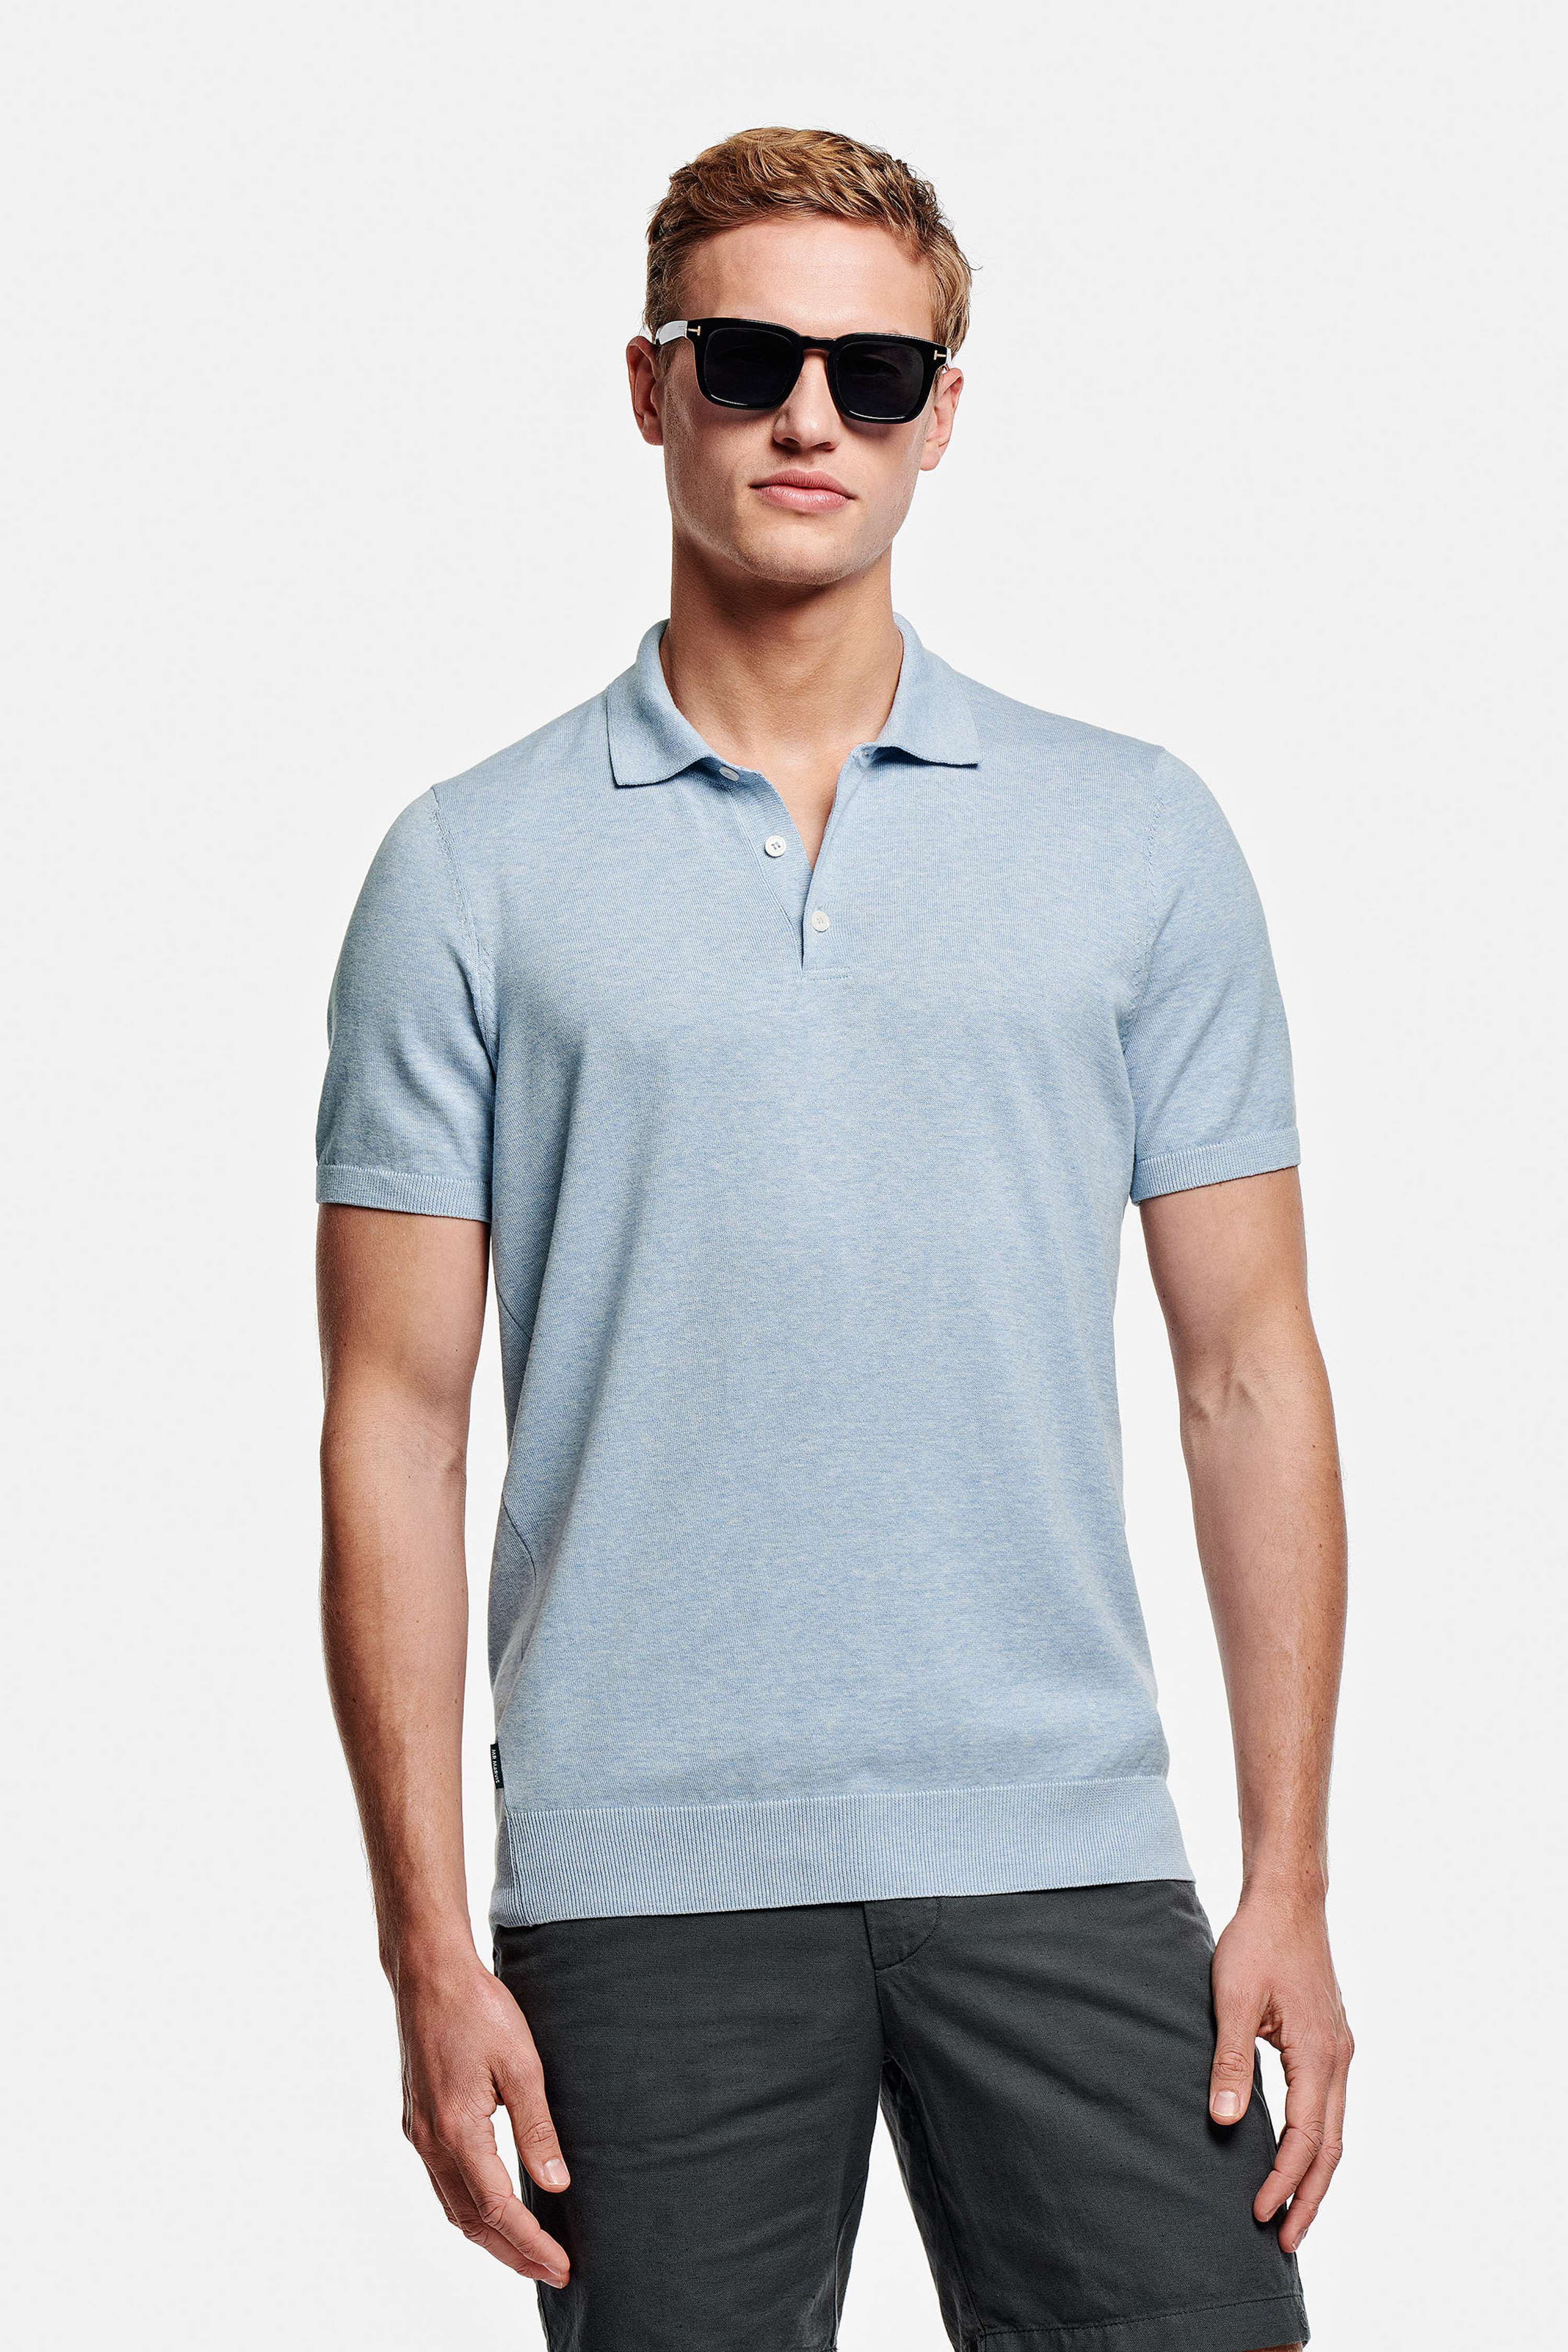 Men's Knitted Polo Shirt | The Knitted Polo | MR MARVIS